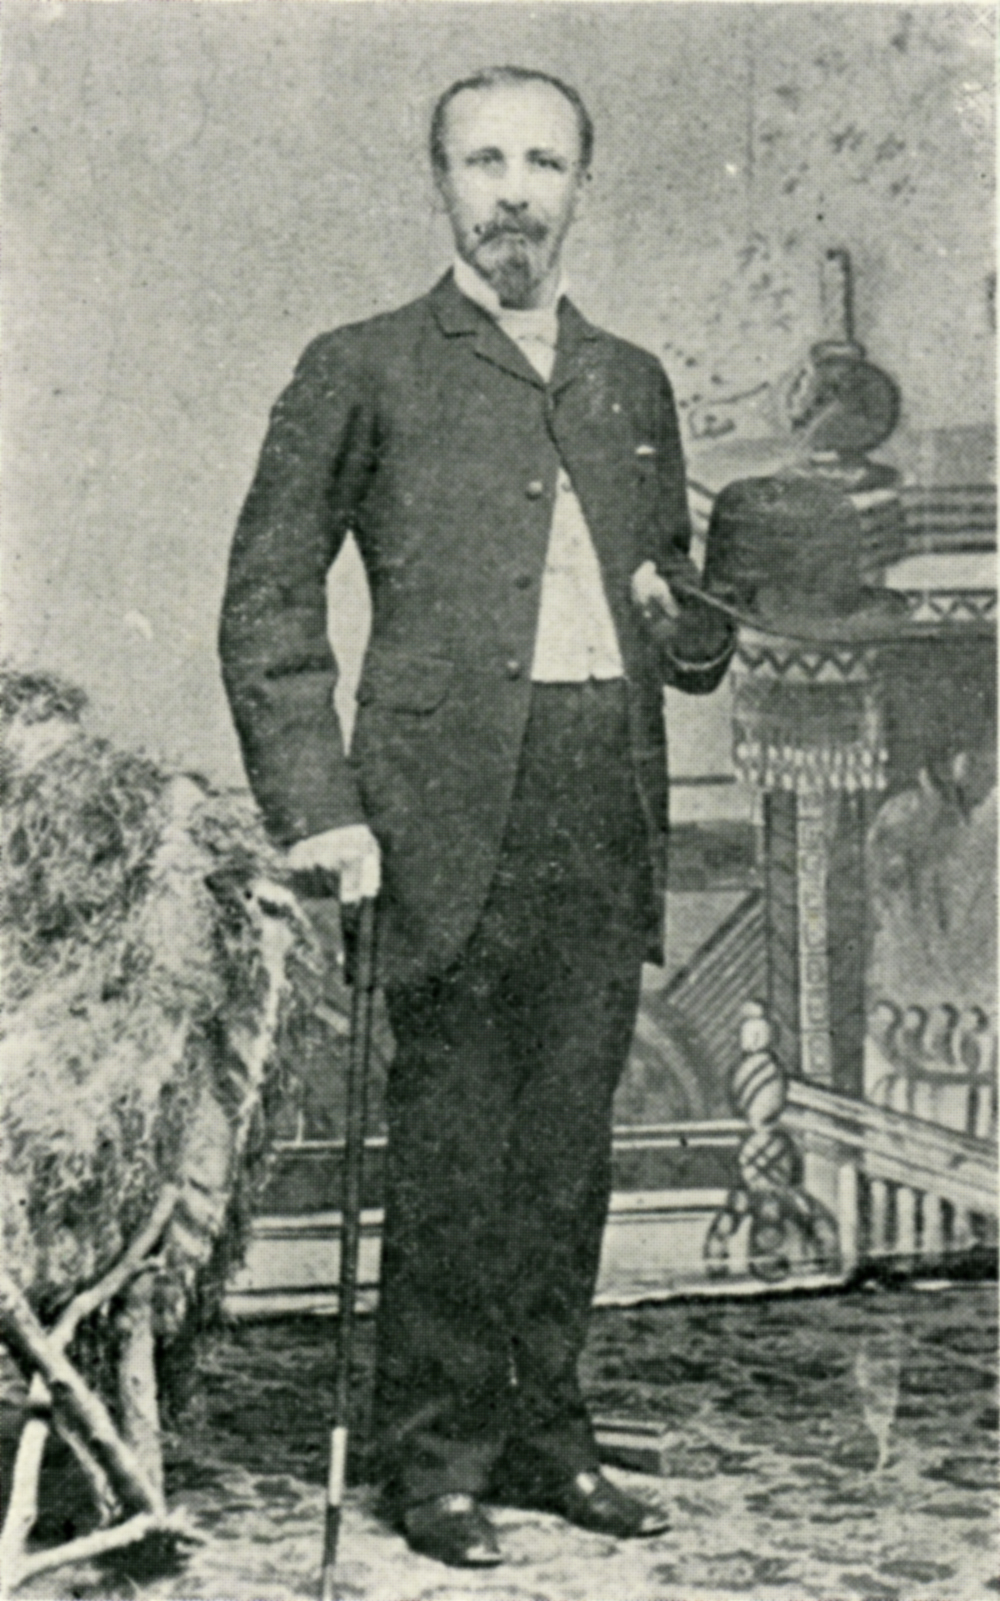 A black and white photo of a man posing in a suit and with a cane. Image link will enlarge image.